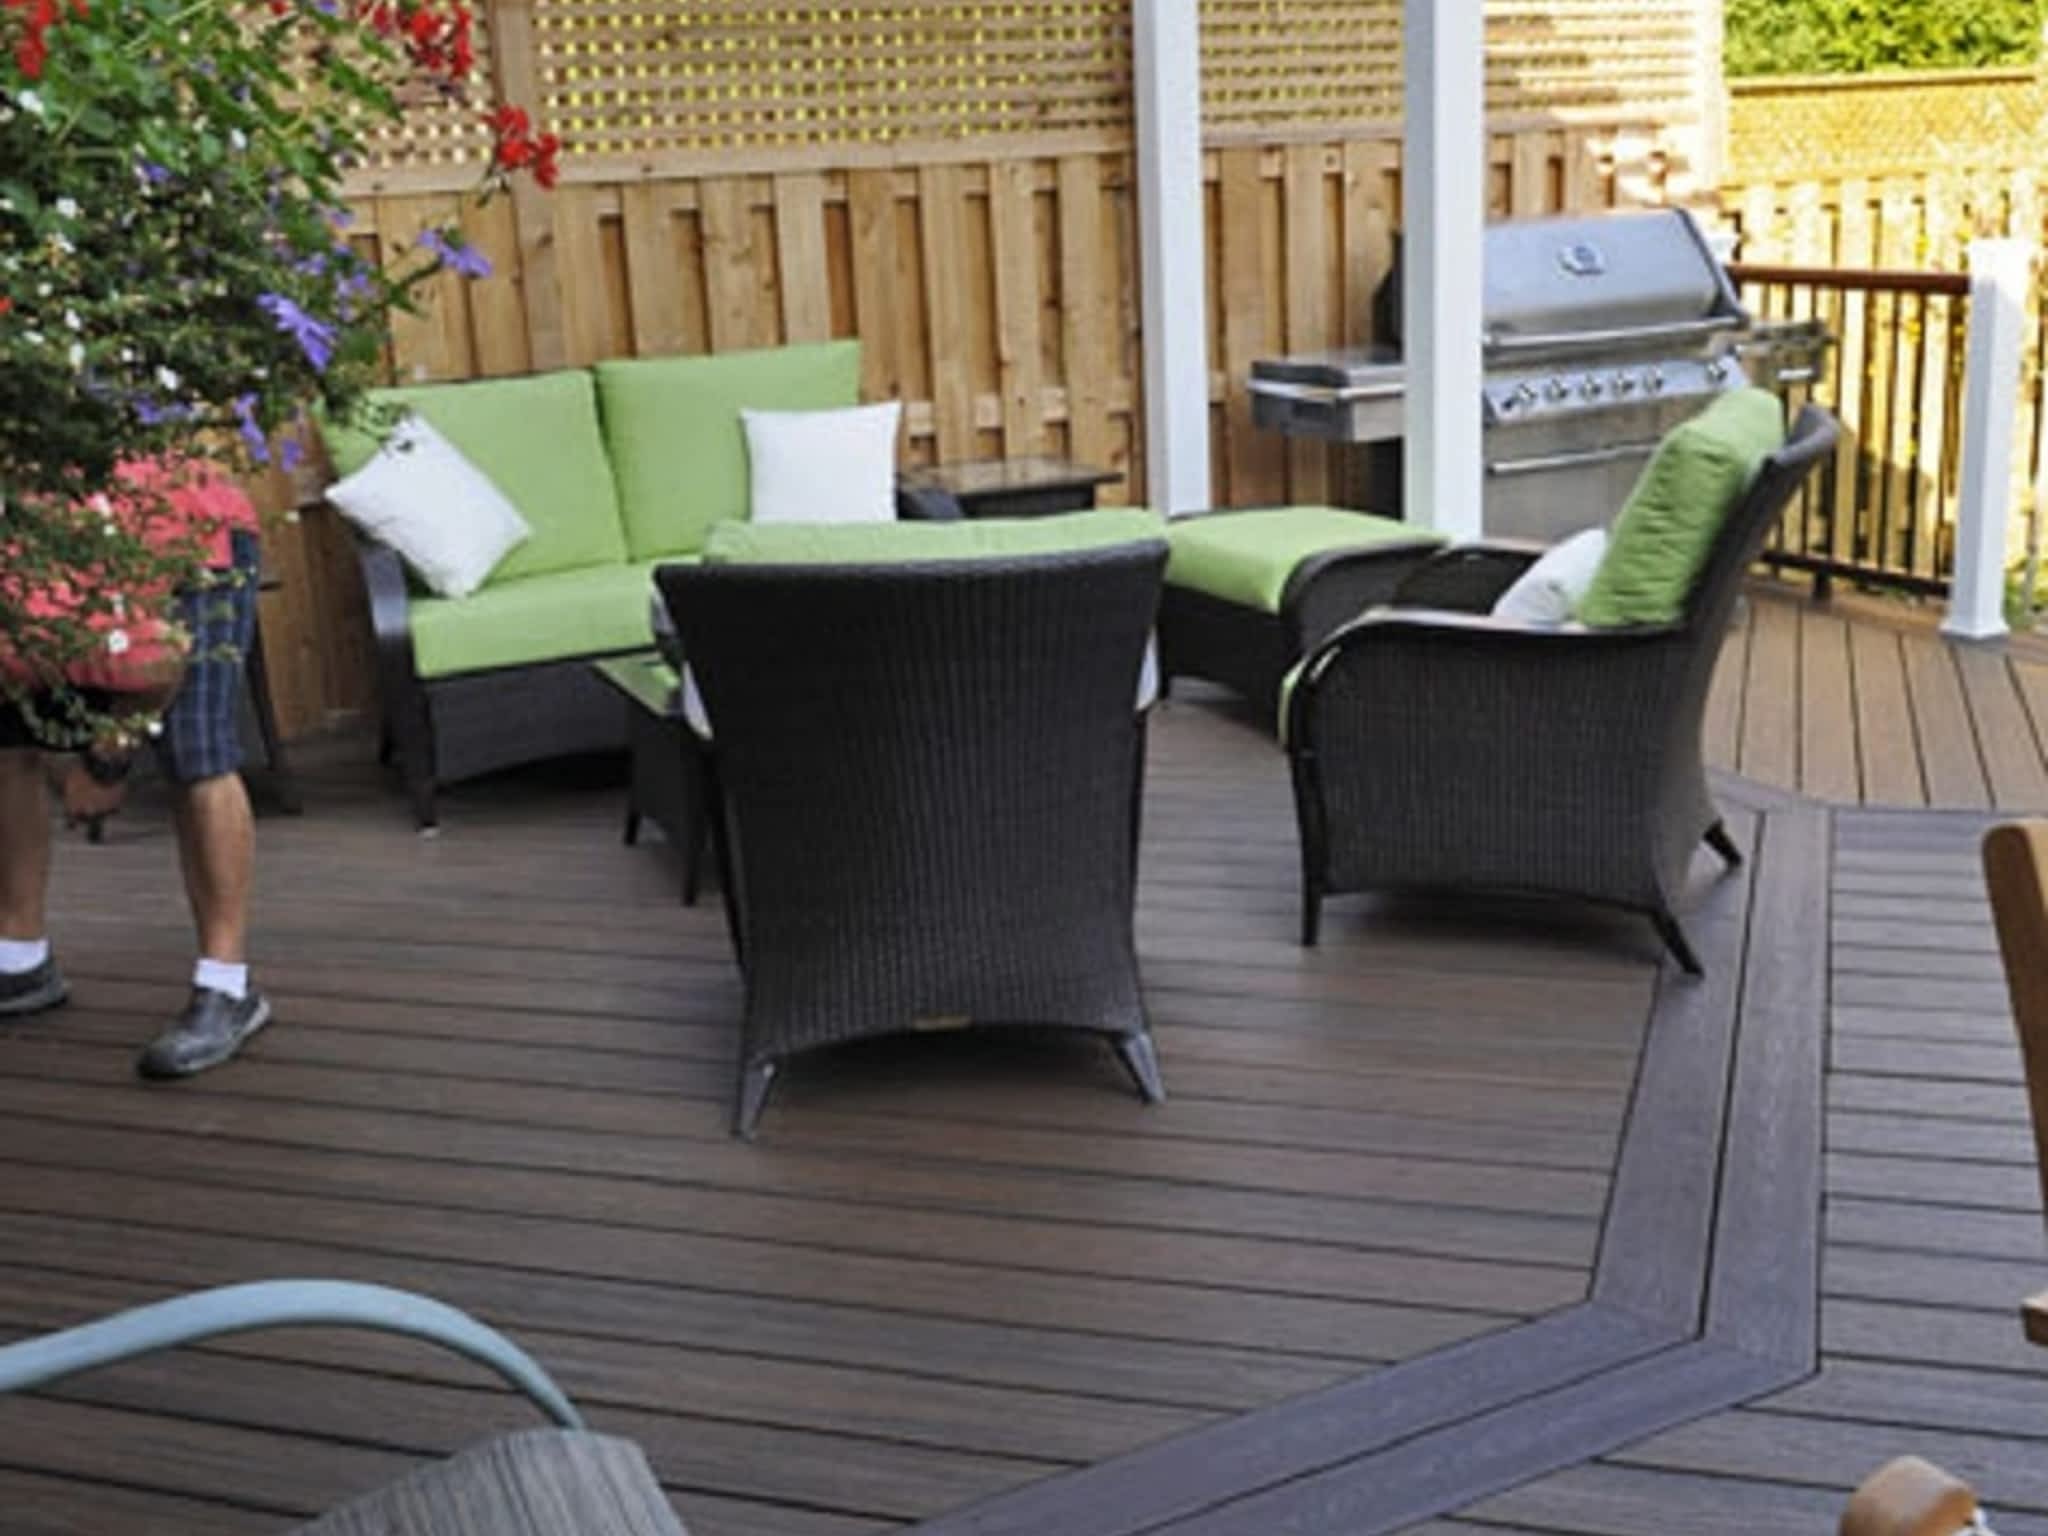 photo Your Deck Company